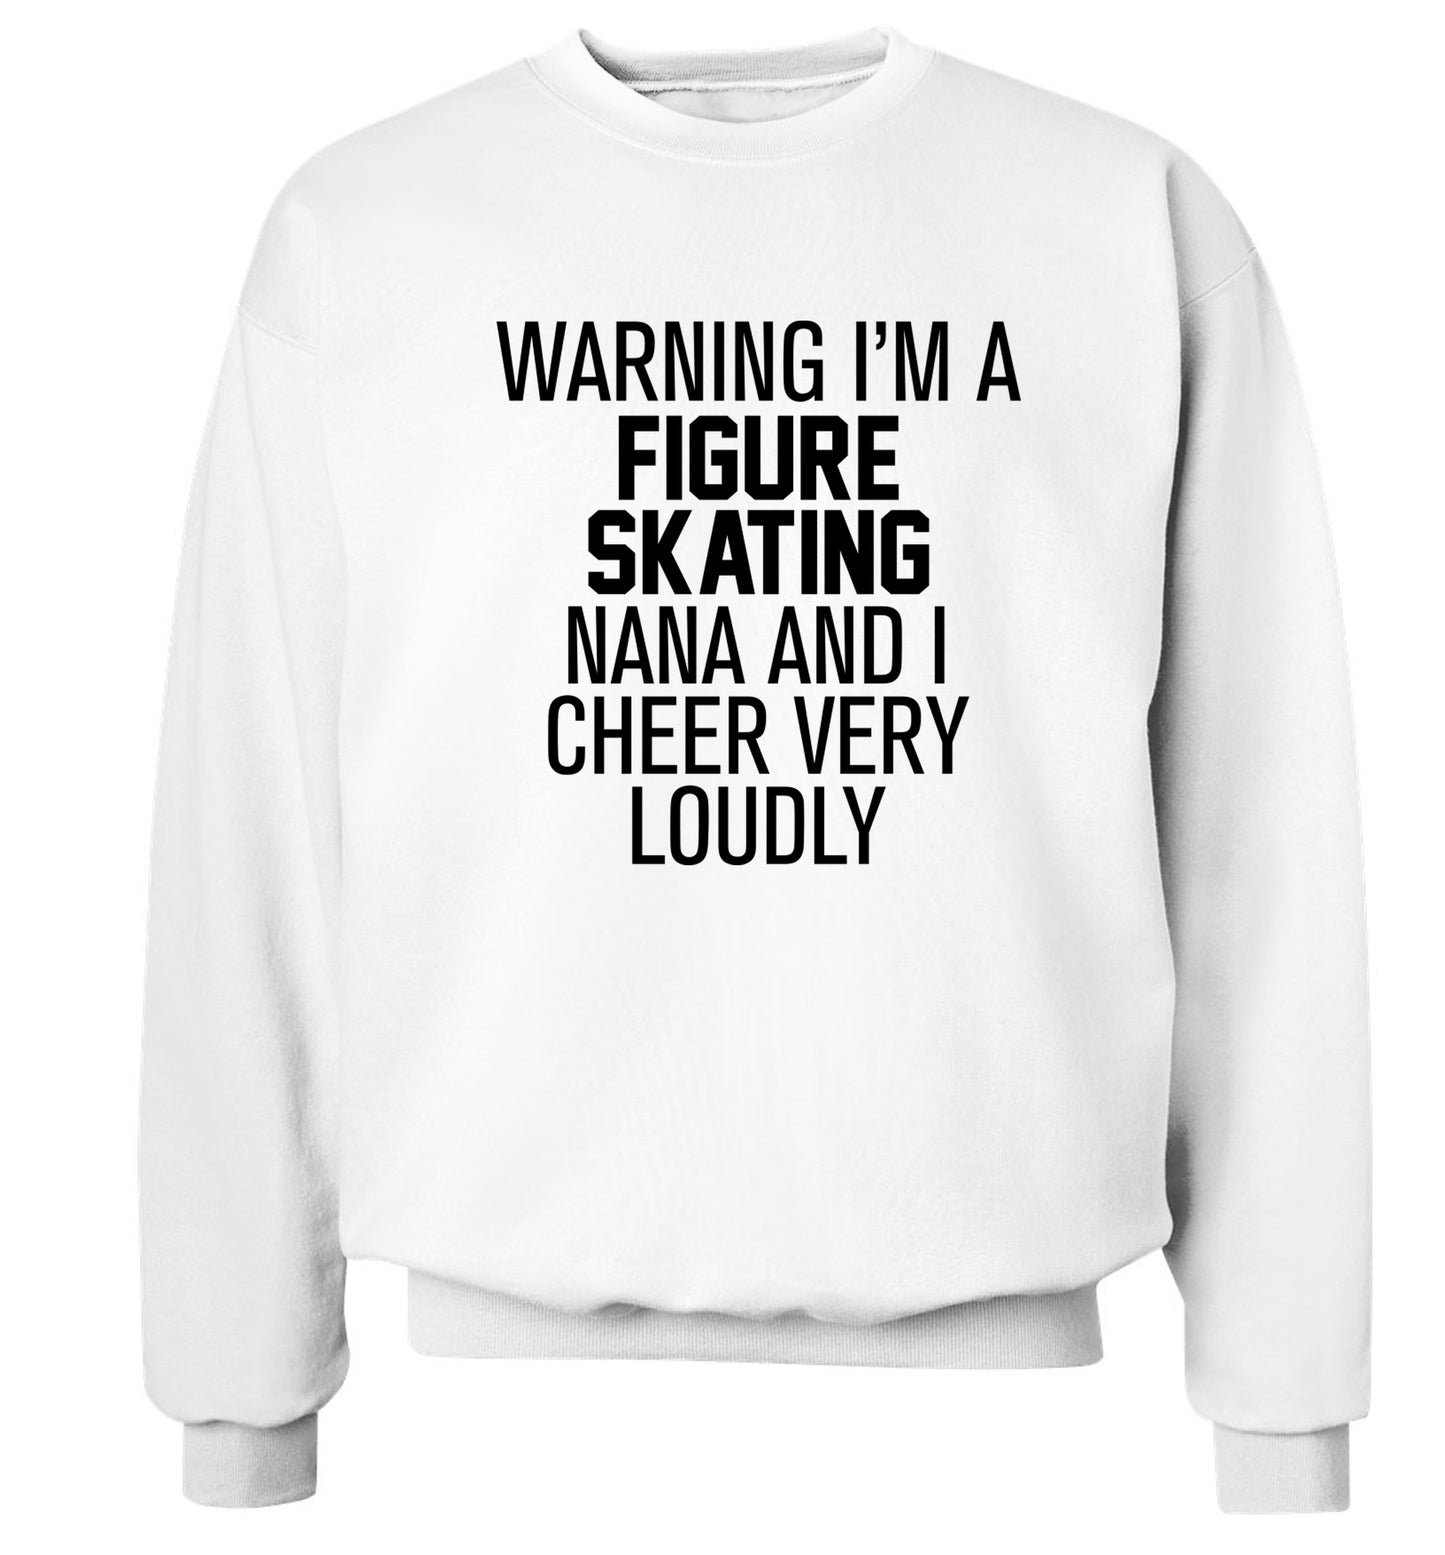 Warning I'm a figure skating nana and I cheer very loudly Adult's unisexwhite Sweater 2XL